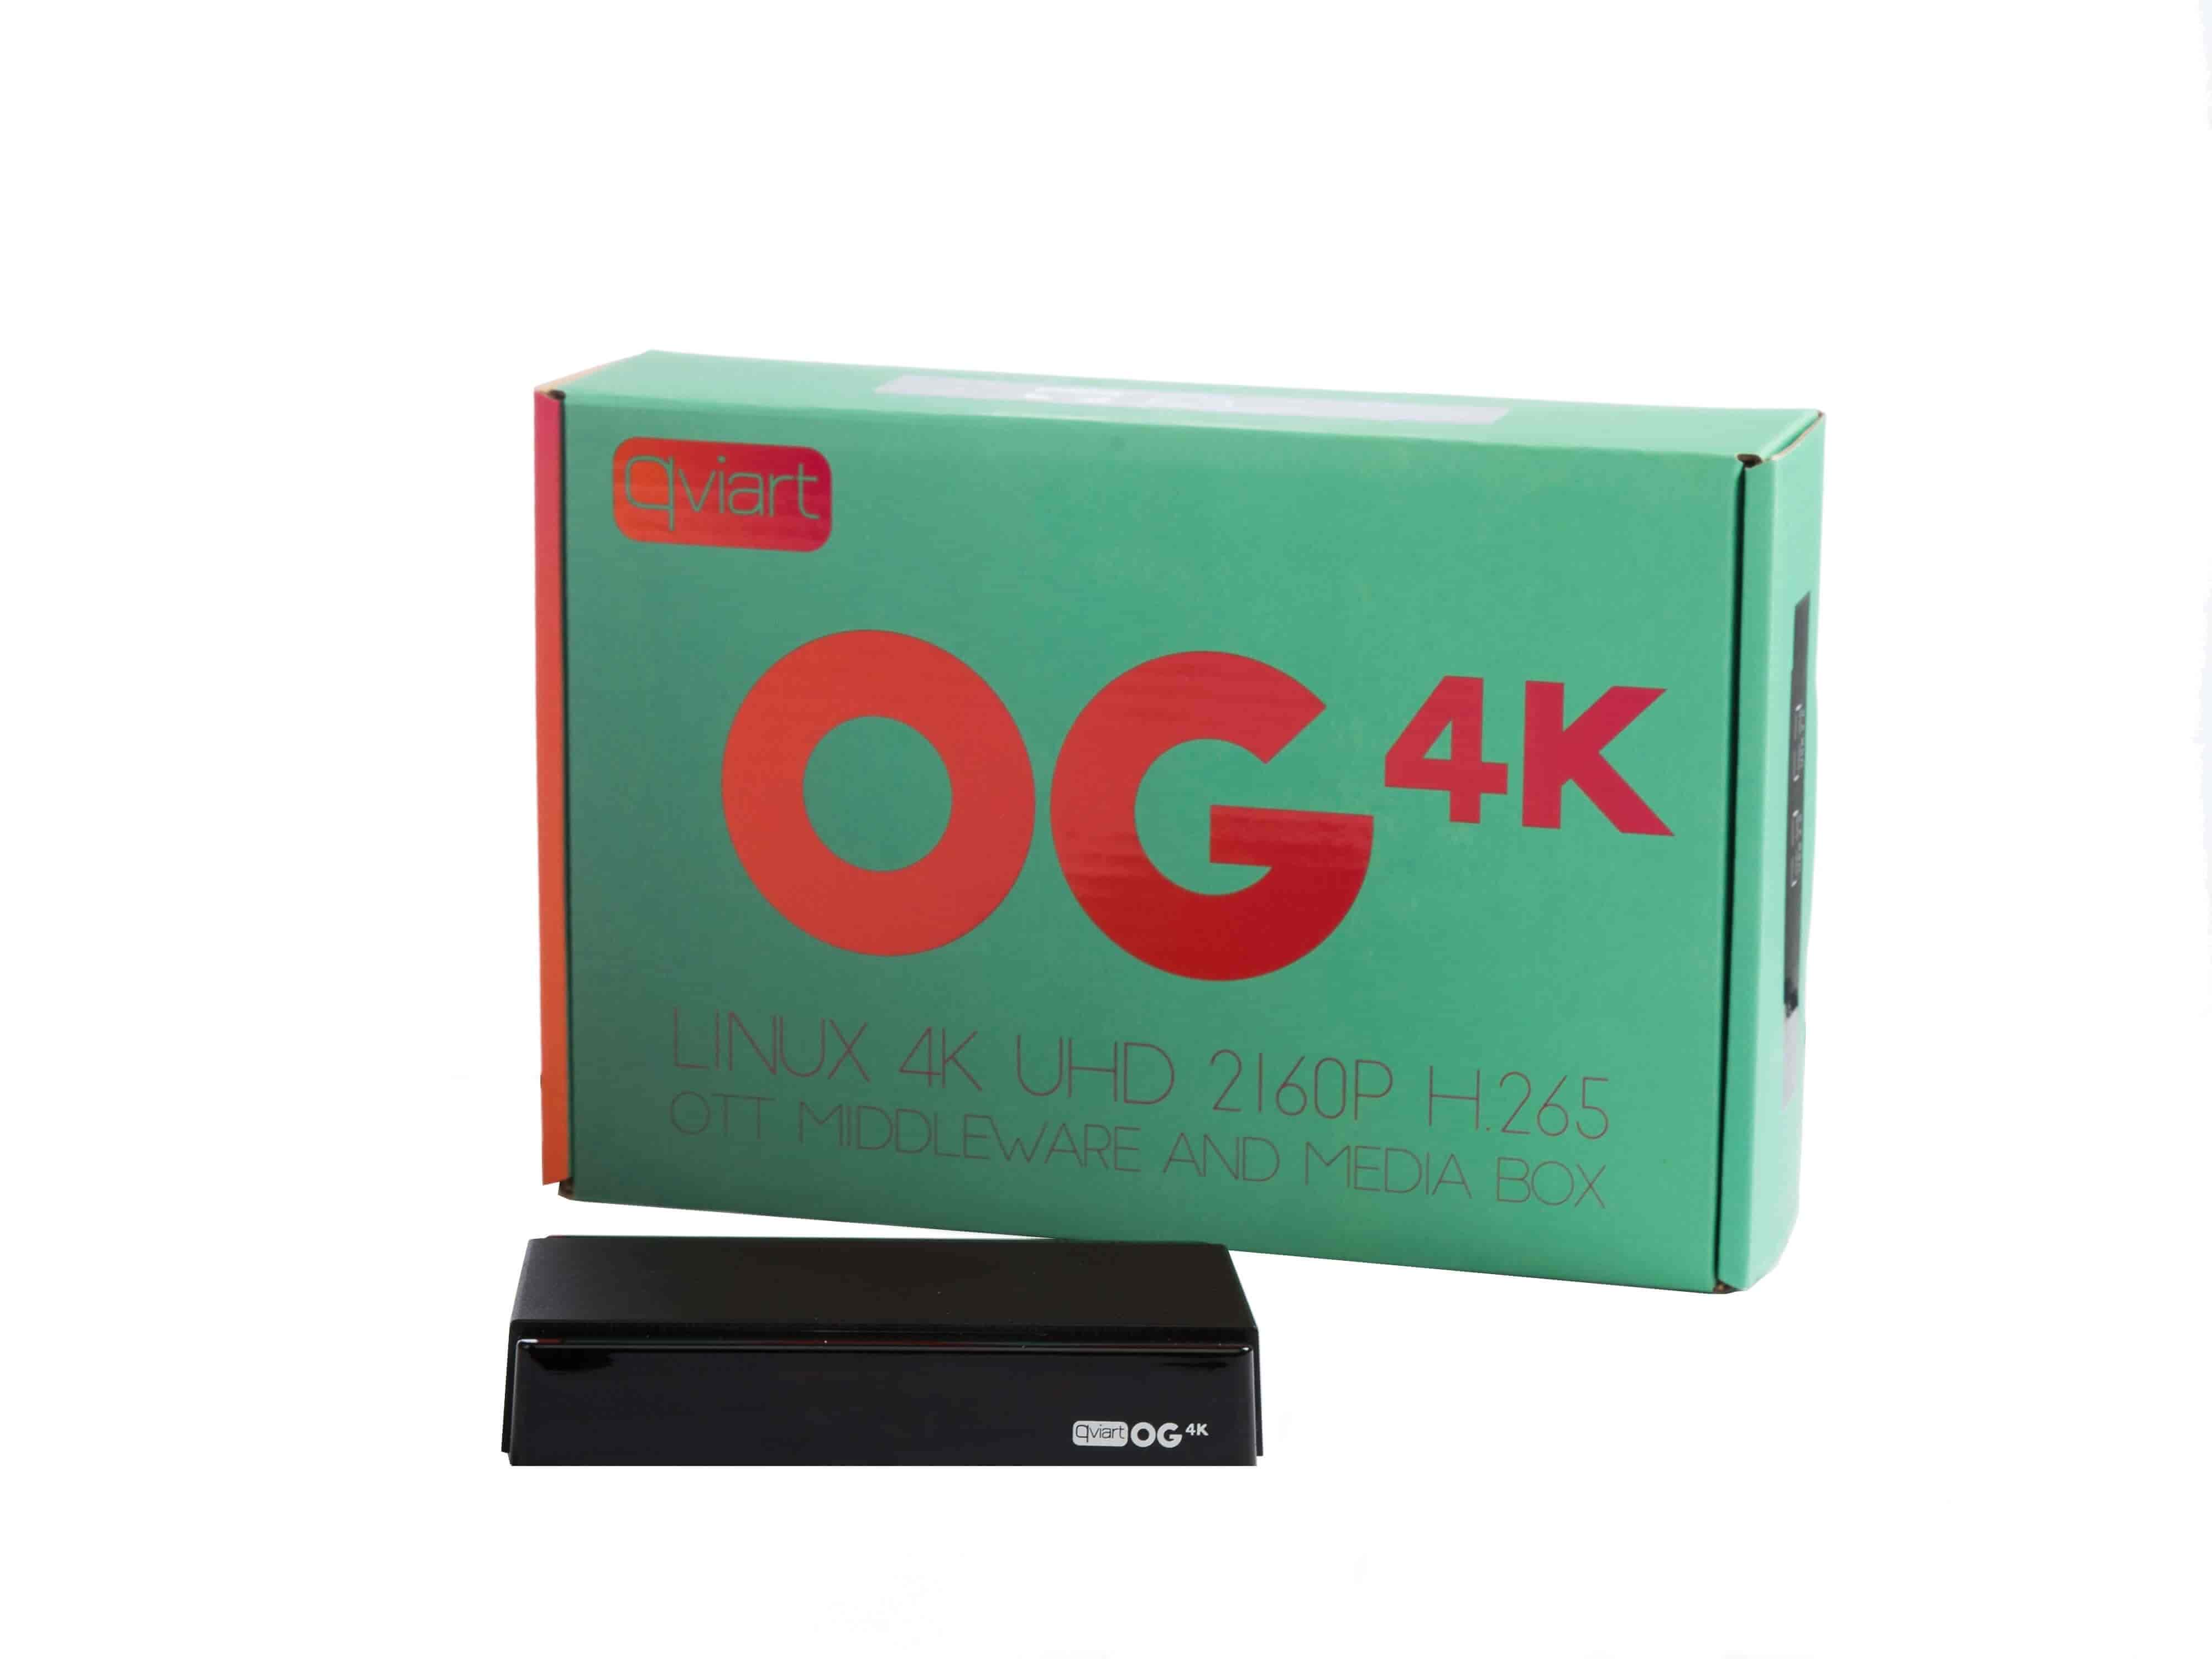 Qviart OG 4K IPTV box linux OTT UHD 2160p HDR10 HLG 10 bit H.265 boxQviart OG 4K is a powerful, stable, fast and user-friendly Linux OTT UHD 2160p HDR10 HLG 10 bit H.265 box for those who want things simple and efficient. The latest QTV Online TV (Stalker), Xtream, M3U and more IPTV features guarantee the full IPTV experience with a small but powerful box. Also supports internet apps like Netflix, Amazon prime, Youtube, Kodi, etc. Qviart AND 4K is a 4K IPTV media receiver at an absolutely fair price.QVIART LUNIX